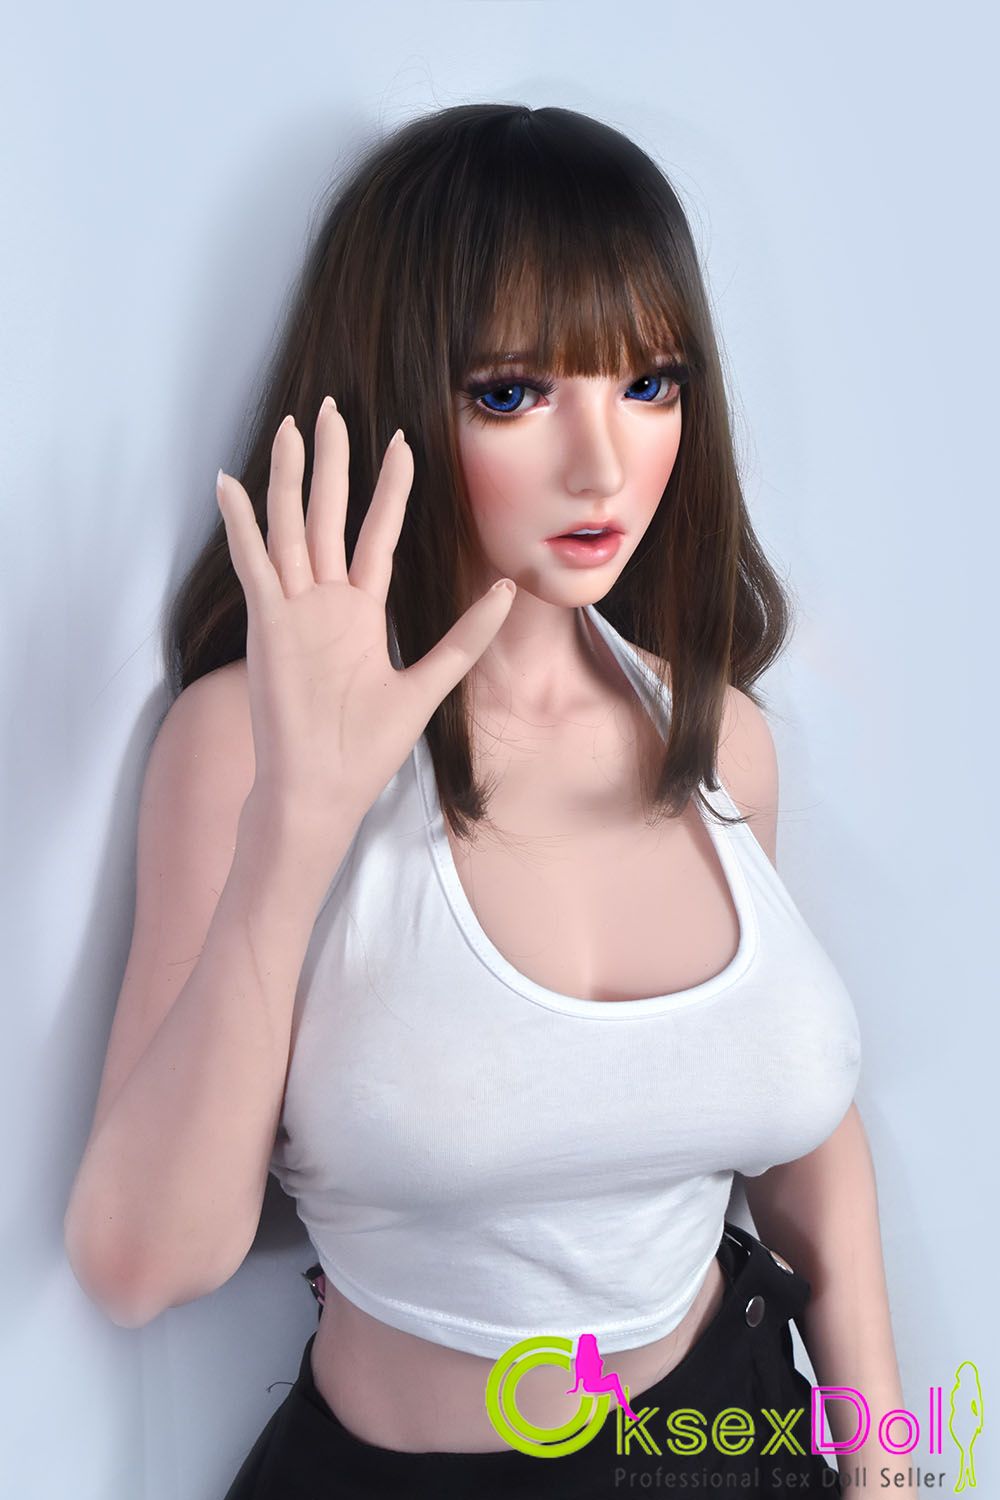 elsababe-doll.html B-cup Real Sex Doll Pictures